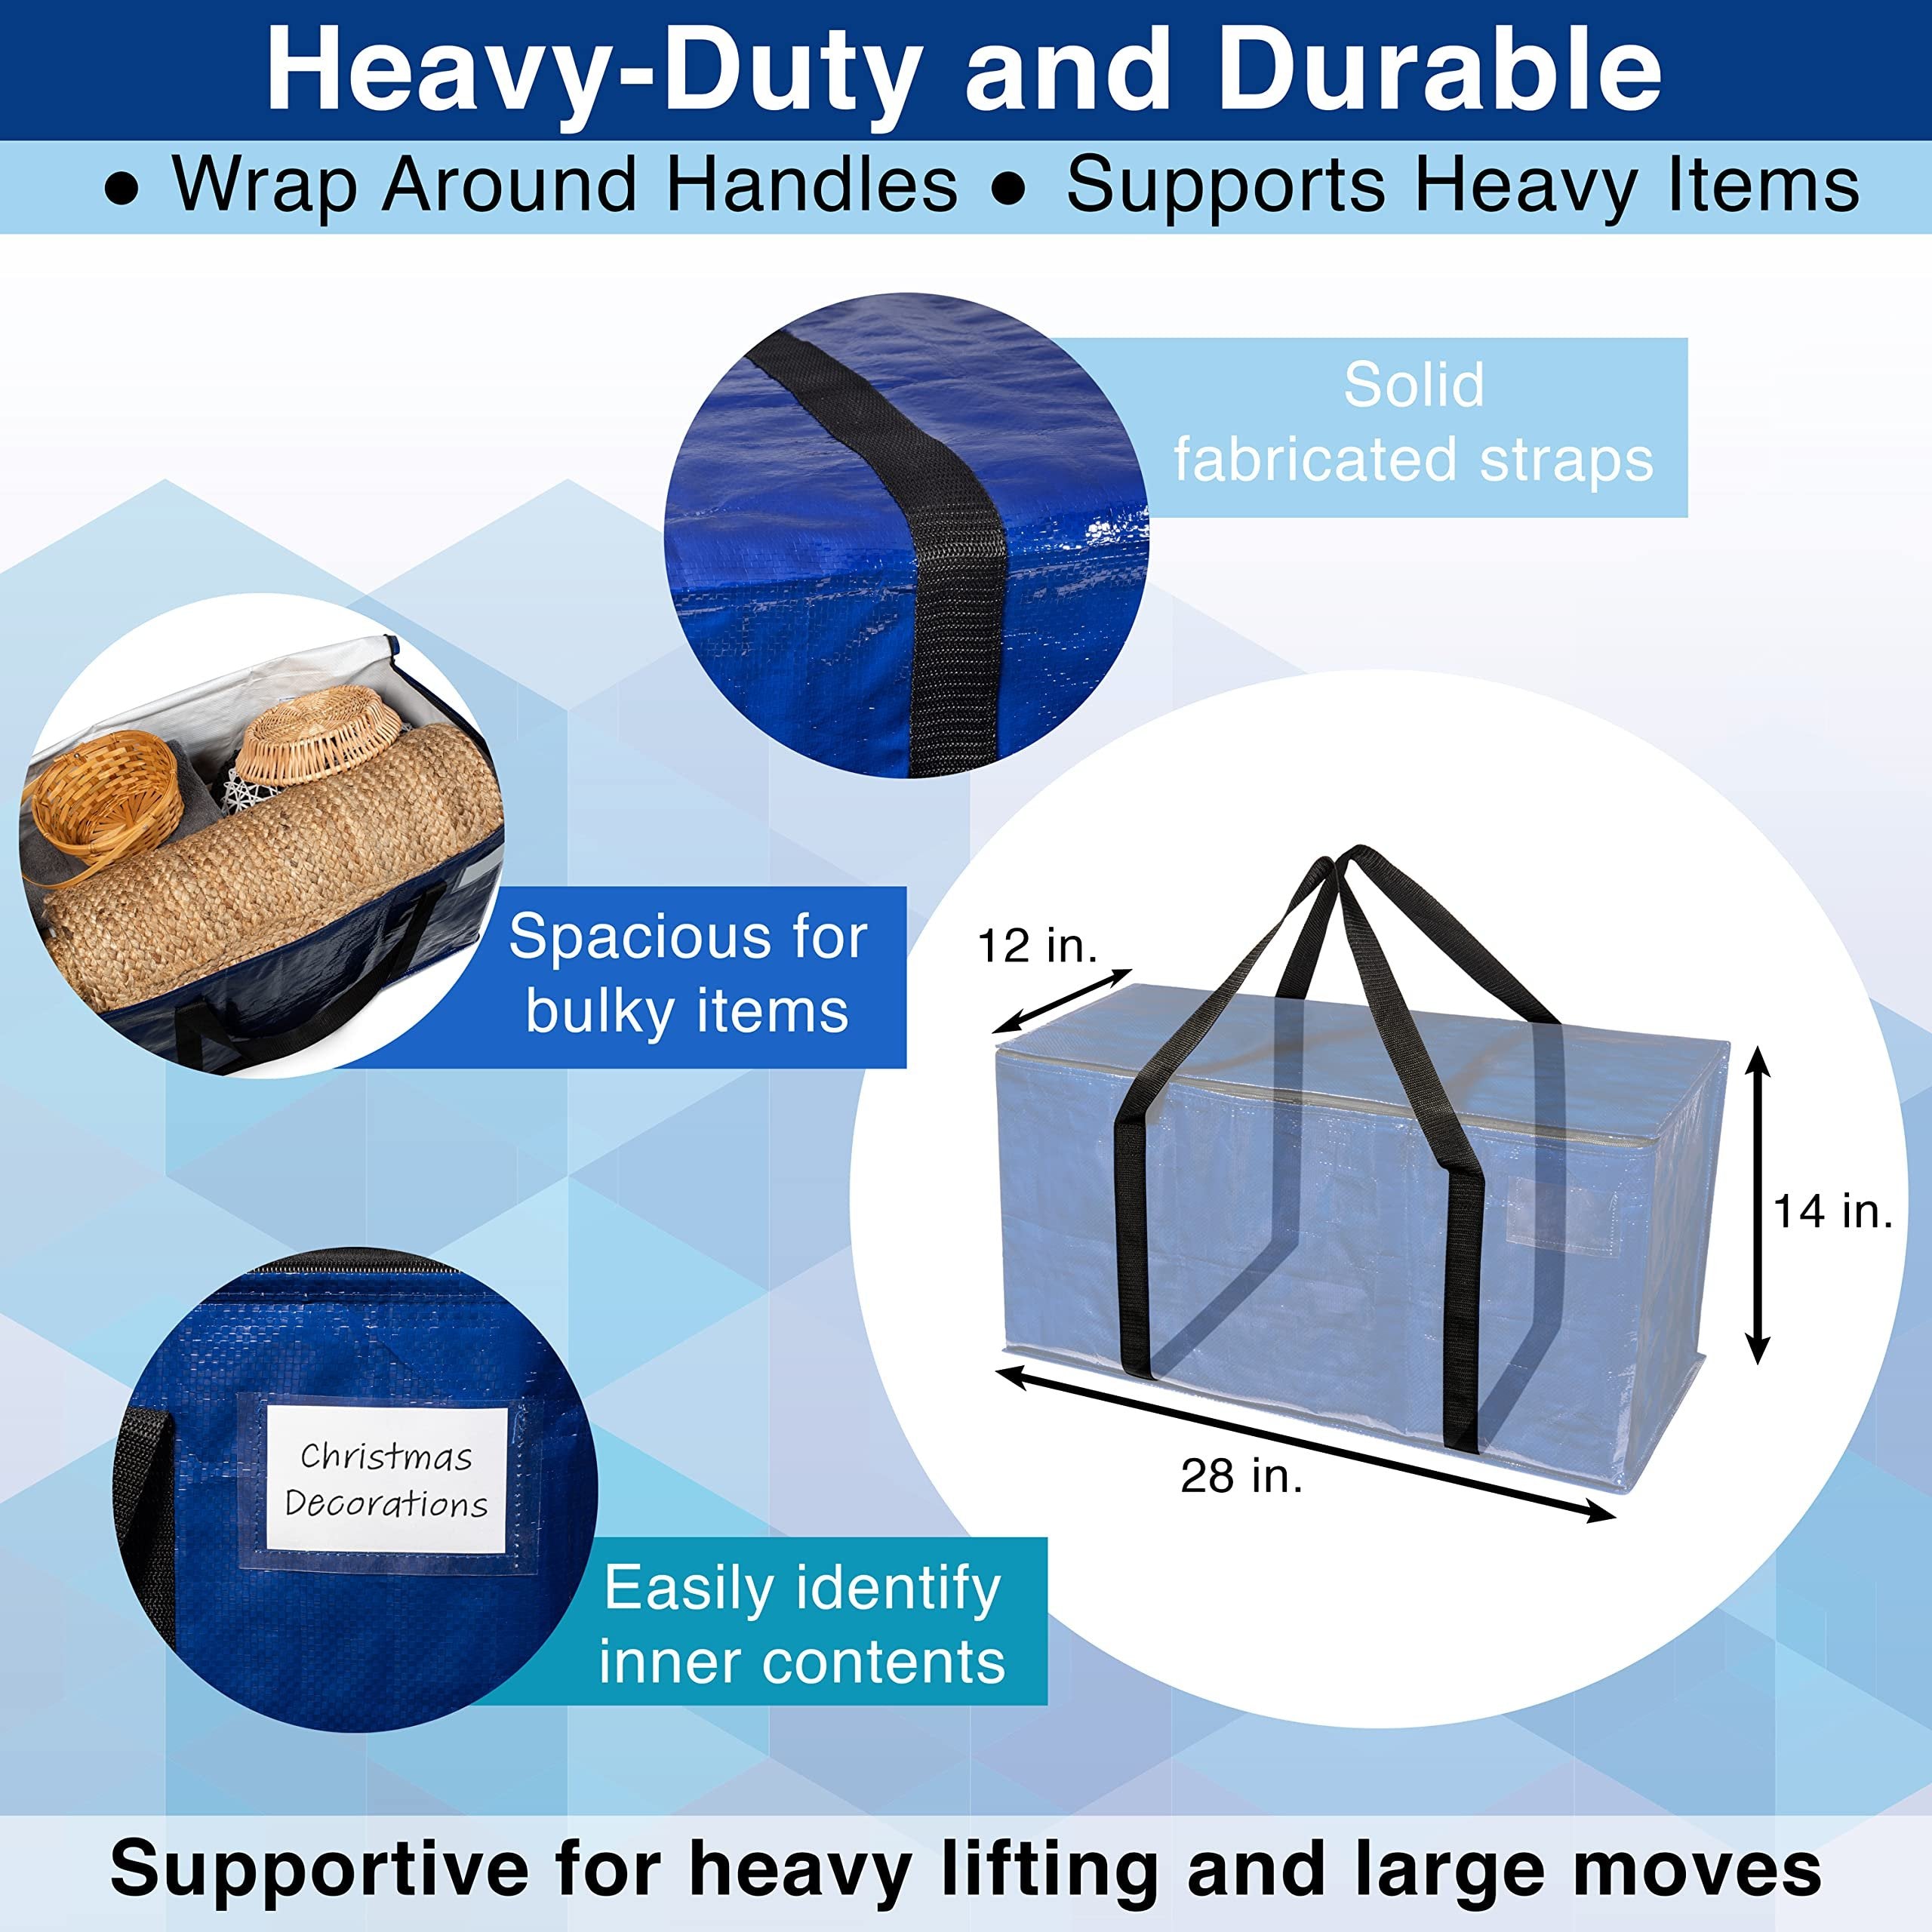 ClearSpace Heavy Duty Moving Bags or Storage Bag - Large Moving Boxes with Backpack Straps, Zippers & Handles - Perfect for Moving, College Dorm, Traveling, Camping, Christmas Decorations, 8 Pack